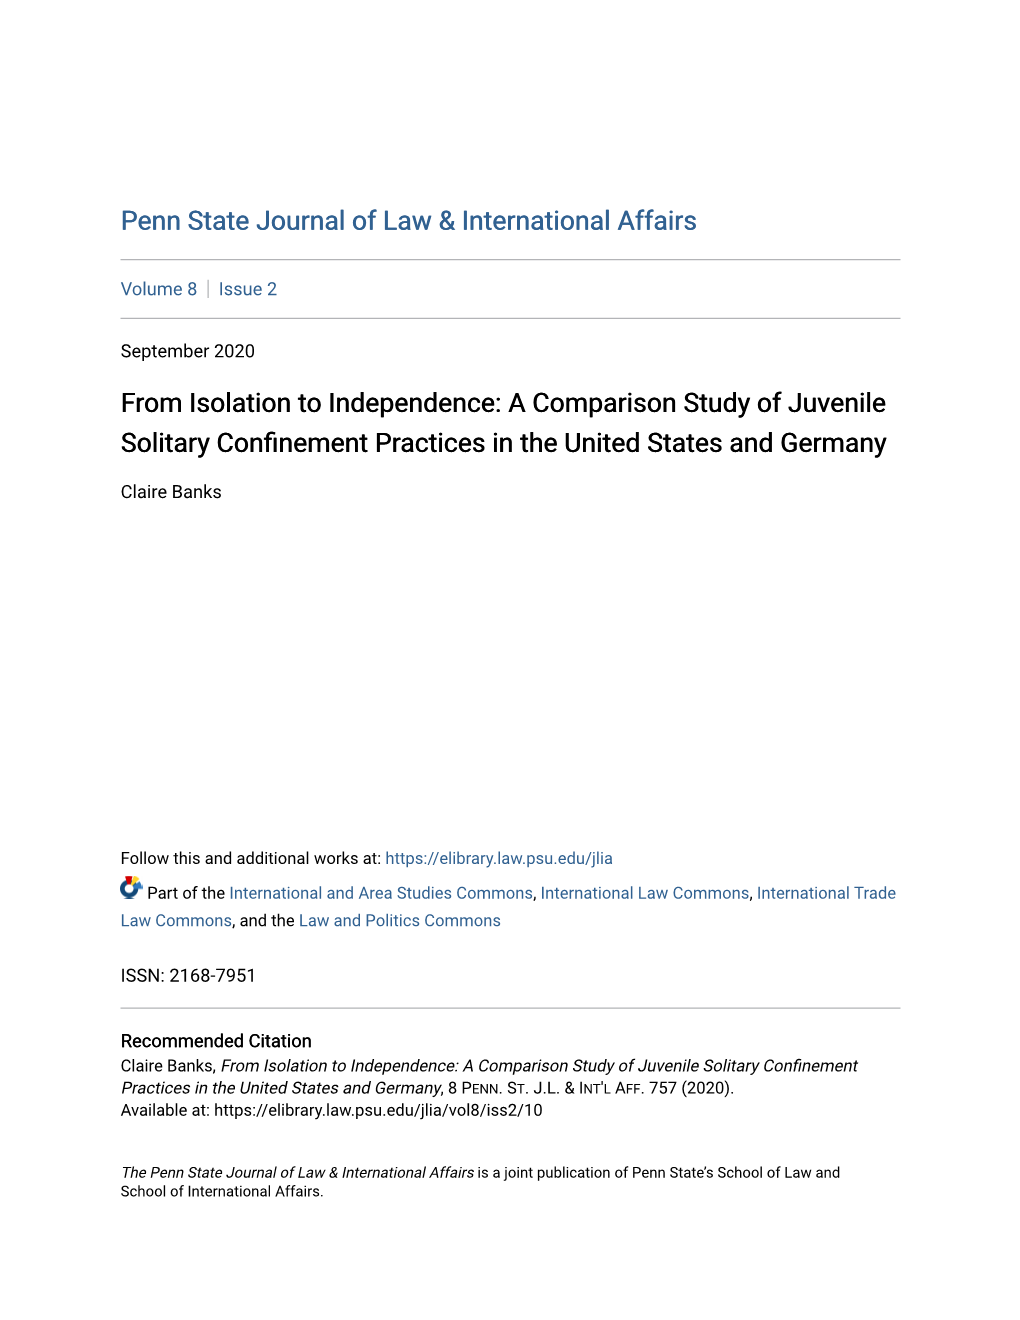 A Comparison Study of Juvenile Solitary Confinement Practices in the United States and Germany